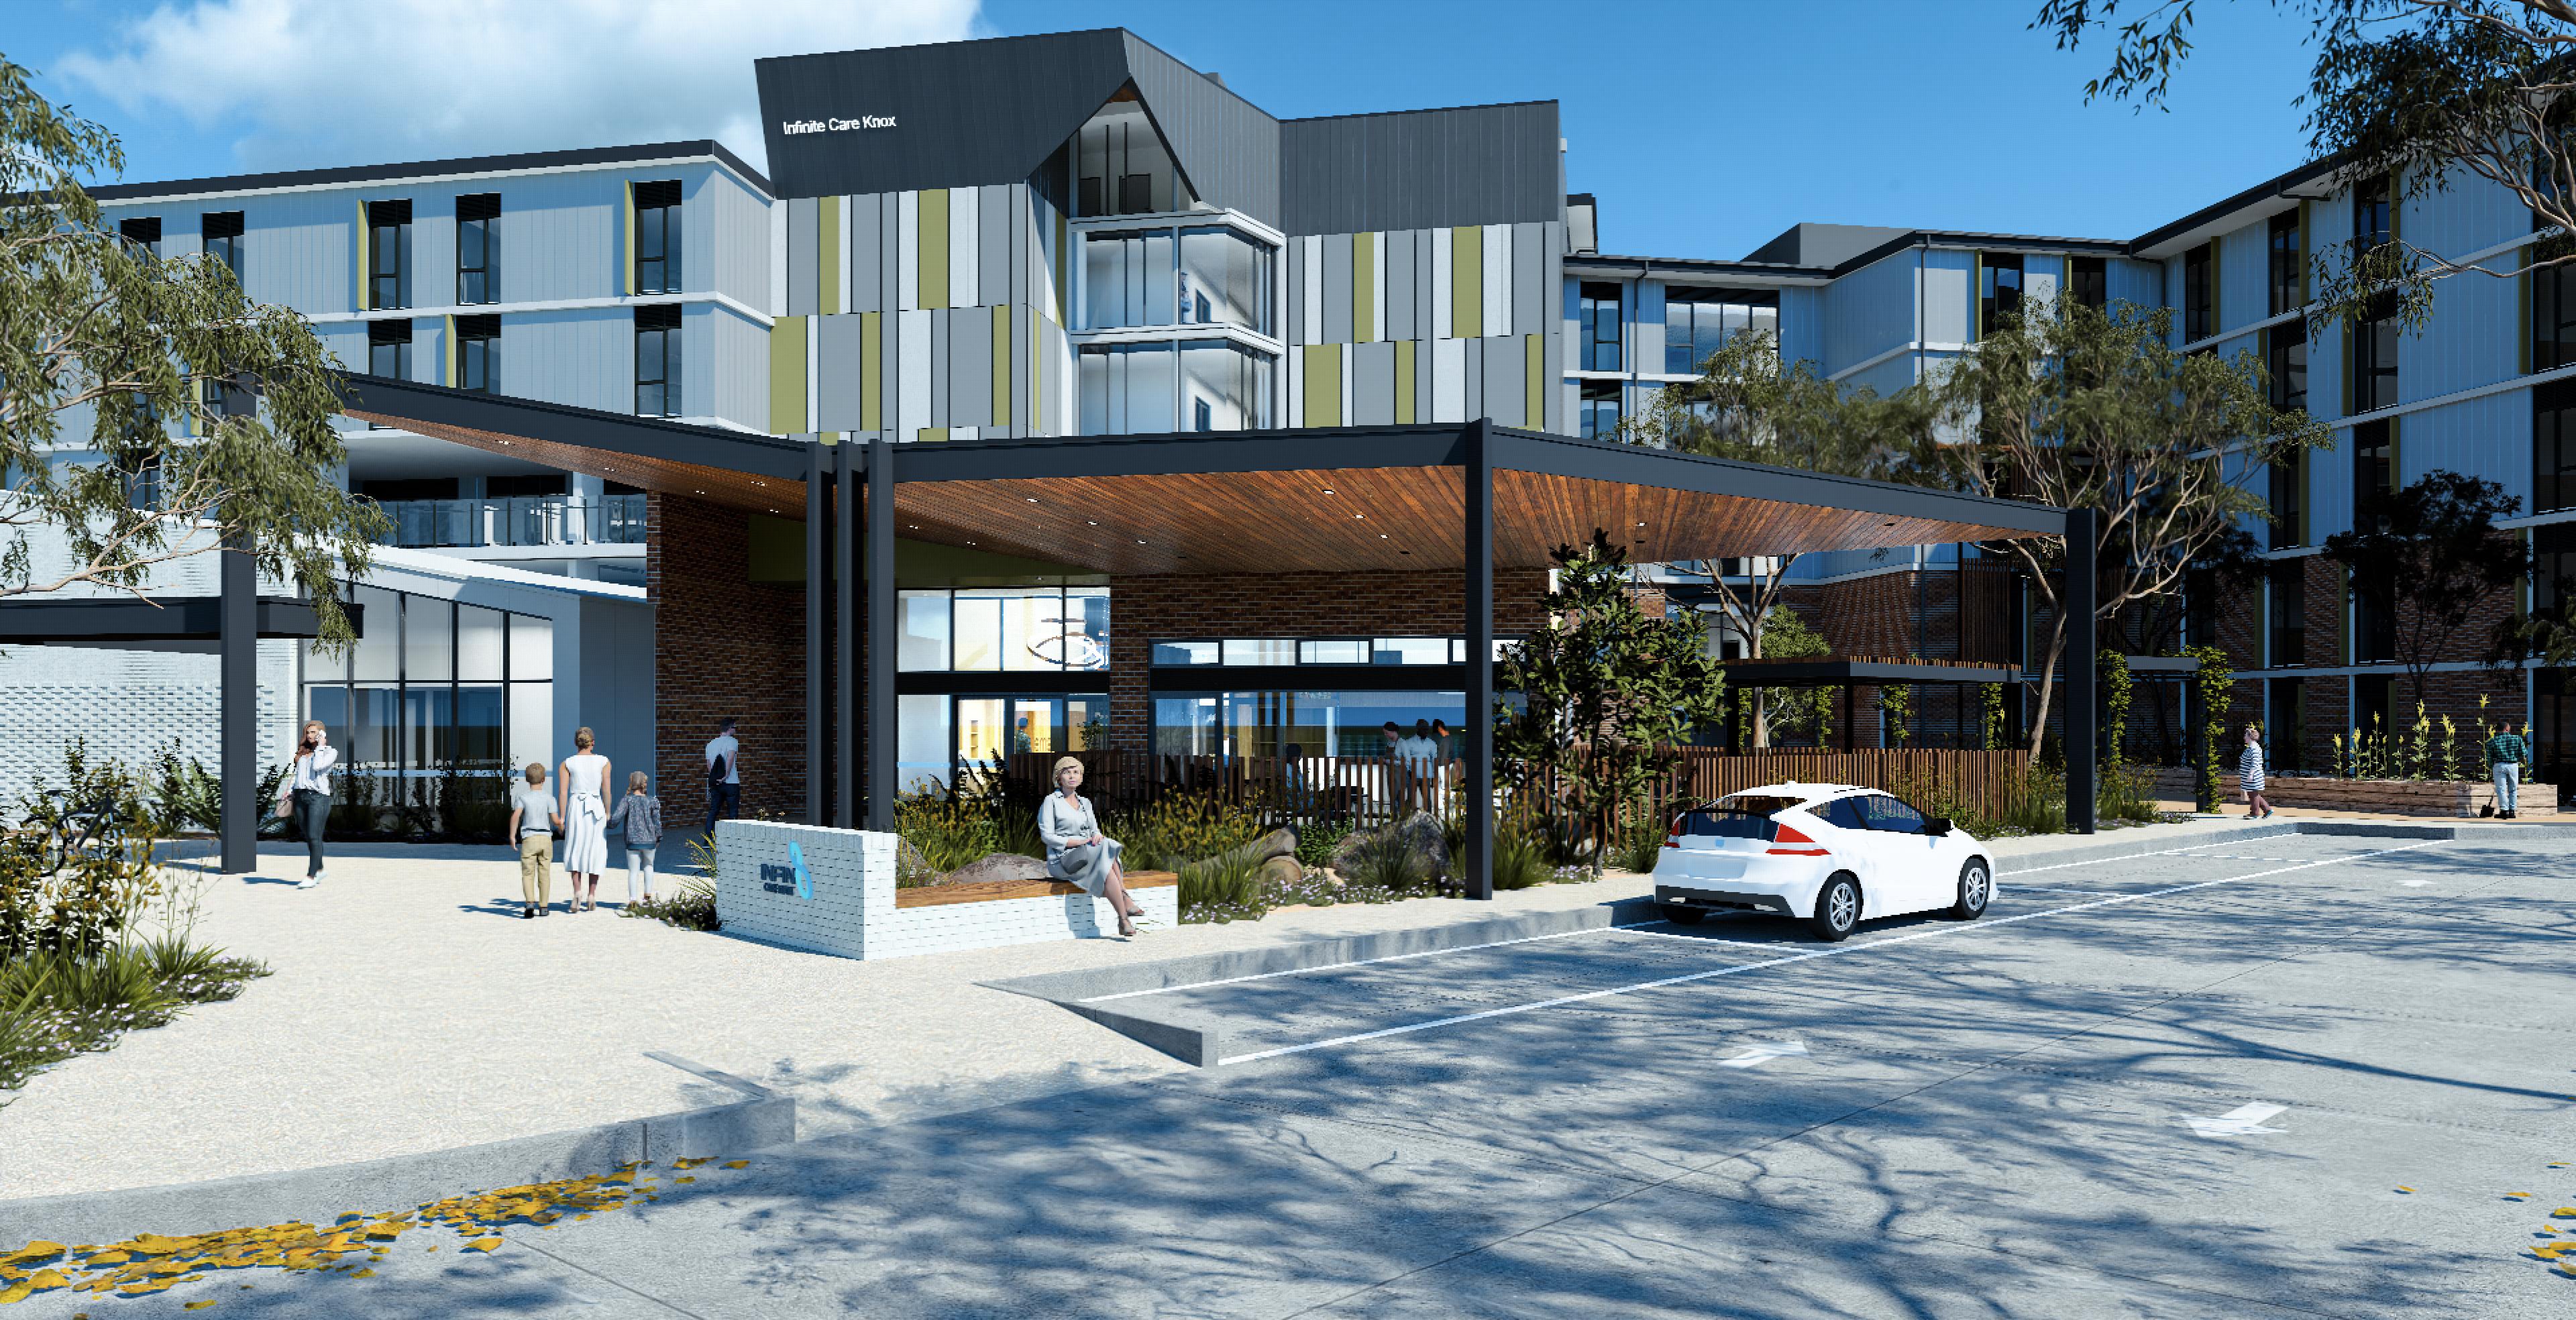 Infin8 Knoxfield Aged Care Melbourne